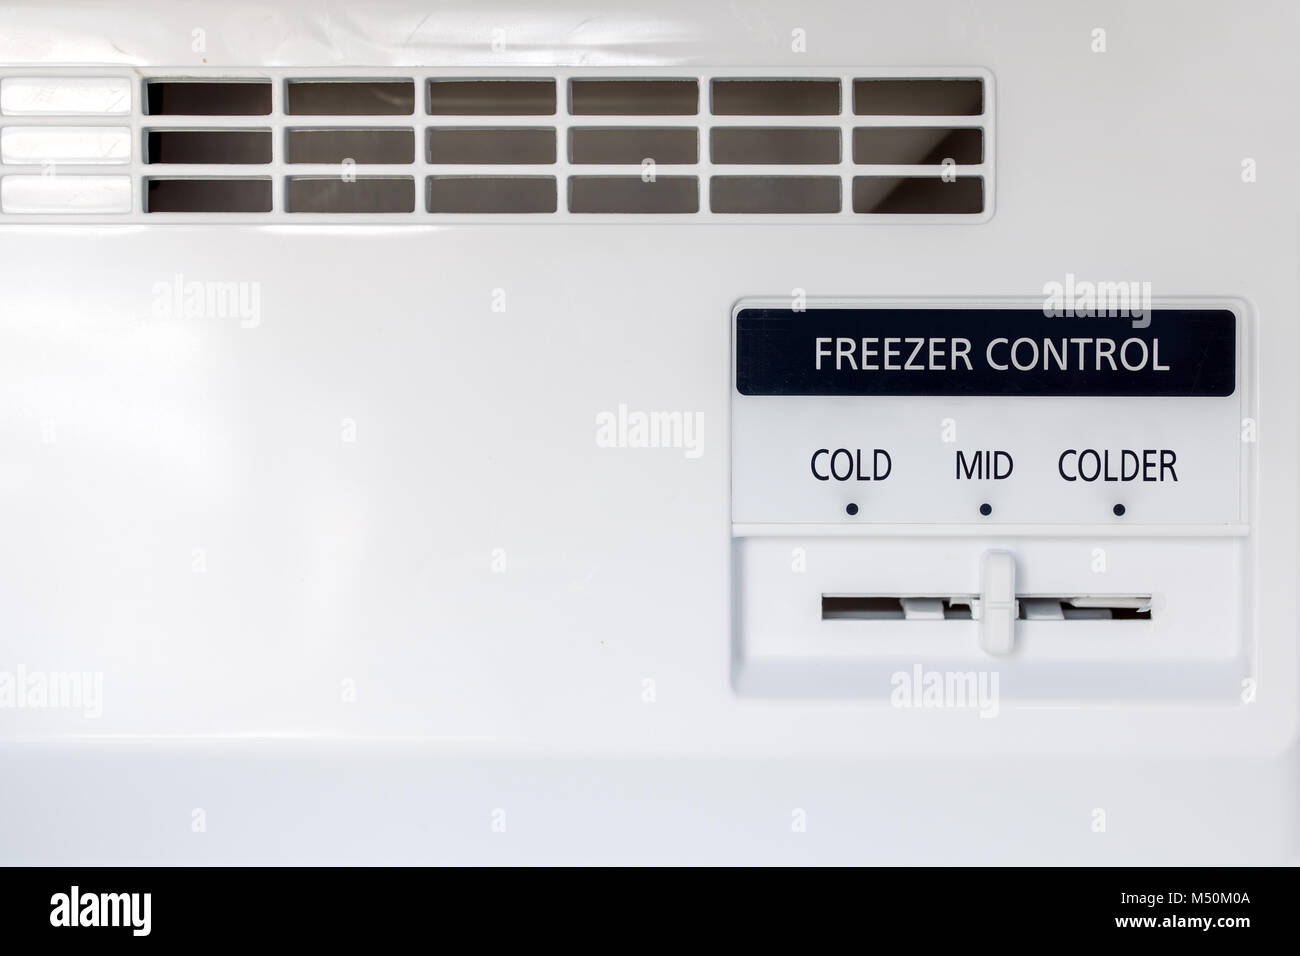 1,323 Refrigerator Thermostat Images, Stock Photos, 3D objects, & Vectors